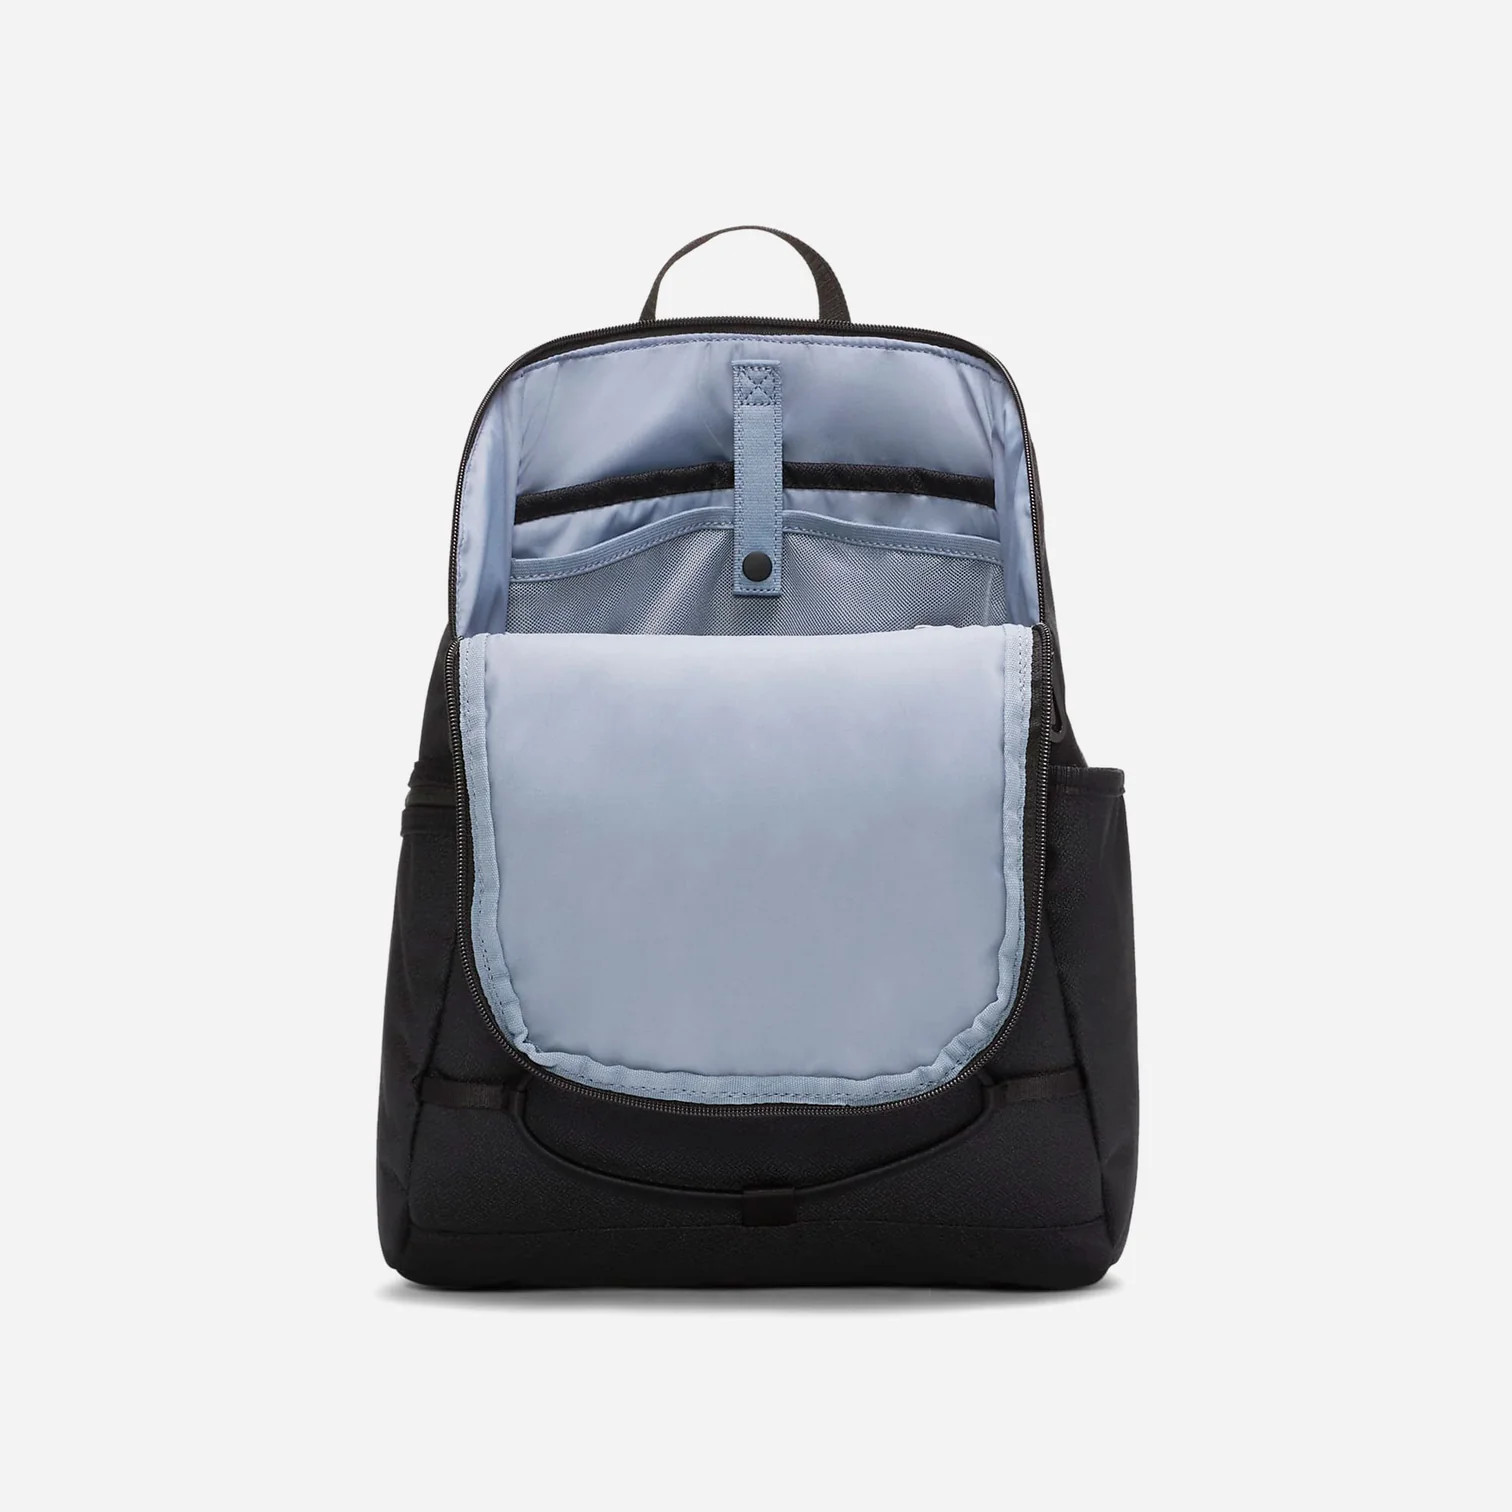 One Training Backpack 16L